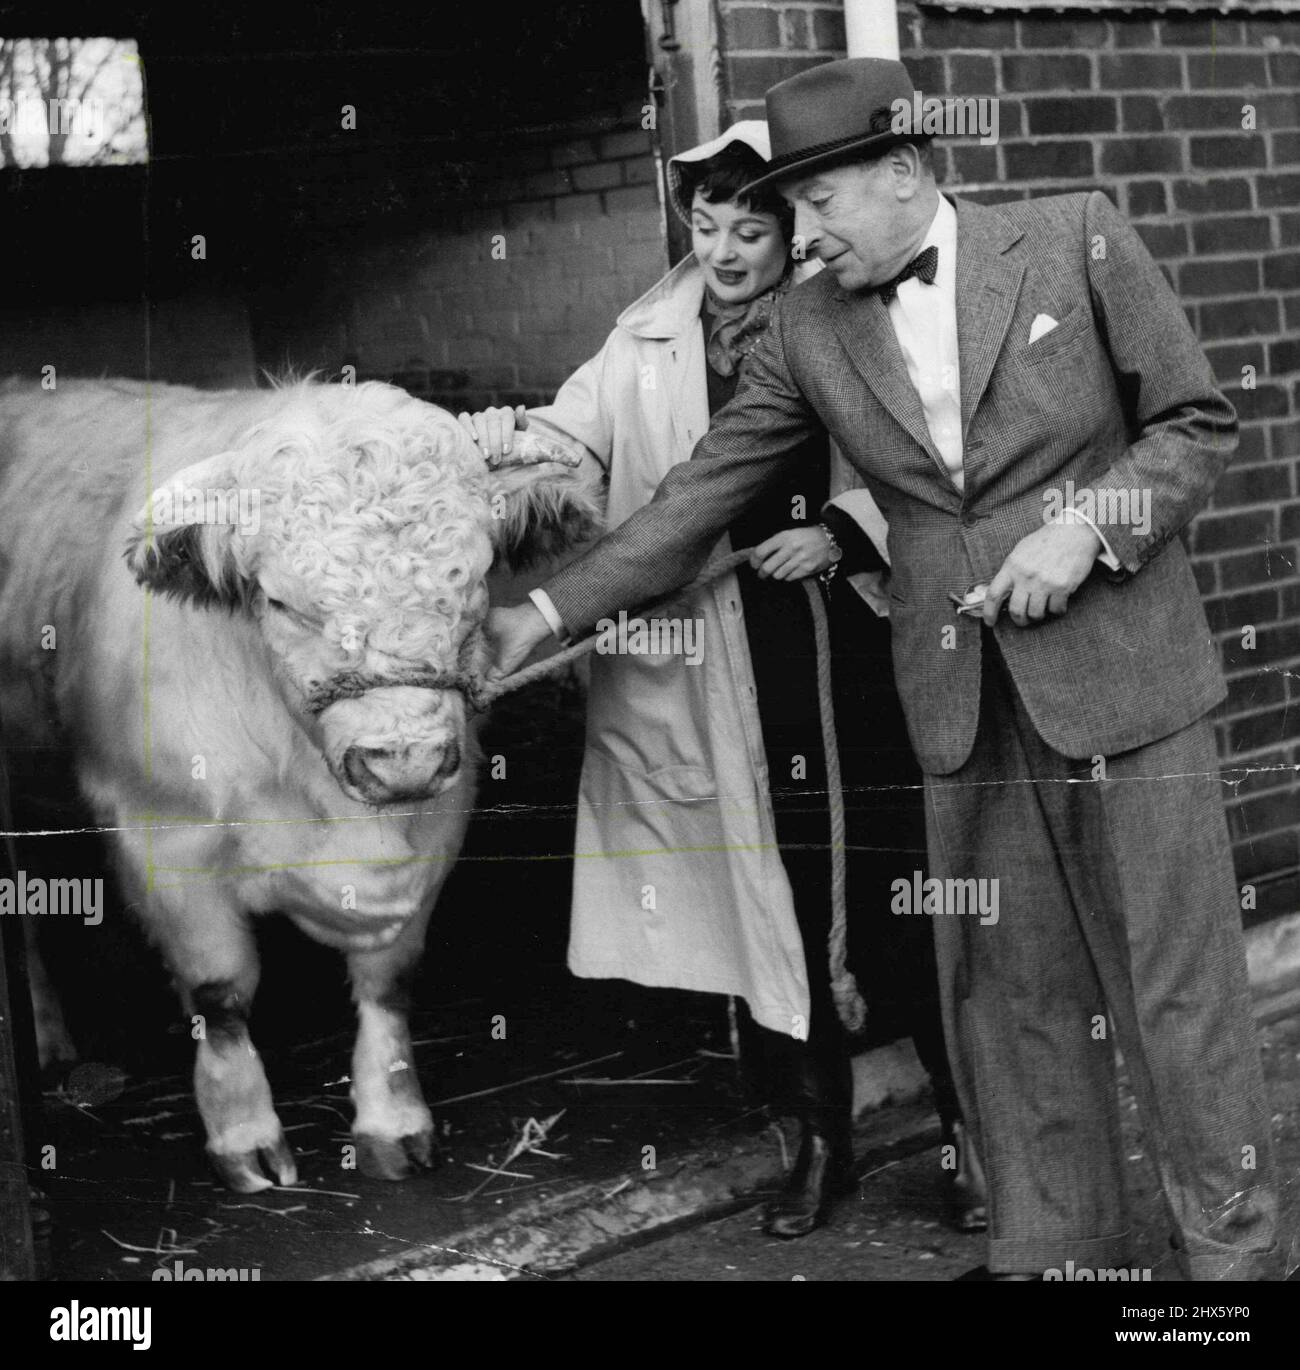 Sir Cedric And Lade Hardwicke -- 4 & 5. Sir Cedric and Lady Hardwicke take Ballechin Barney a pedigree bull of the famous Kybo herd for a walk - Sir Cedric remarked that for a pedigree bull 'Barney could give a few marks on placid temperament to many a film producer'. Barney's value is also in the film star class - his stable companion was just recently sold to the Argentine for nearly 6,000 pounds. December 21, 1954. (Photo by Jack Esten).;Sir Cedric And Lade Hardwicke -- 4 & 5. Sir Cedric and Stock Photo